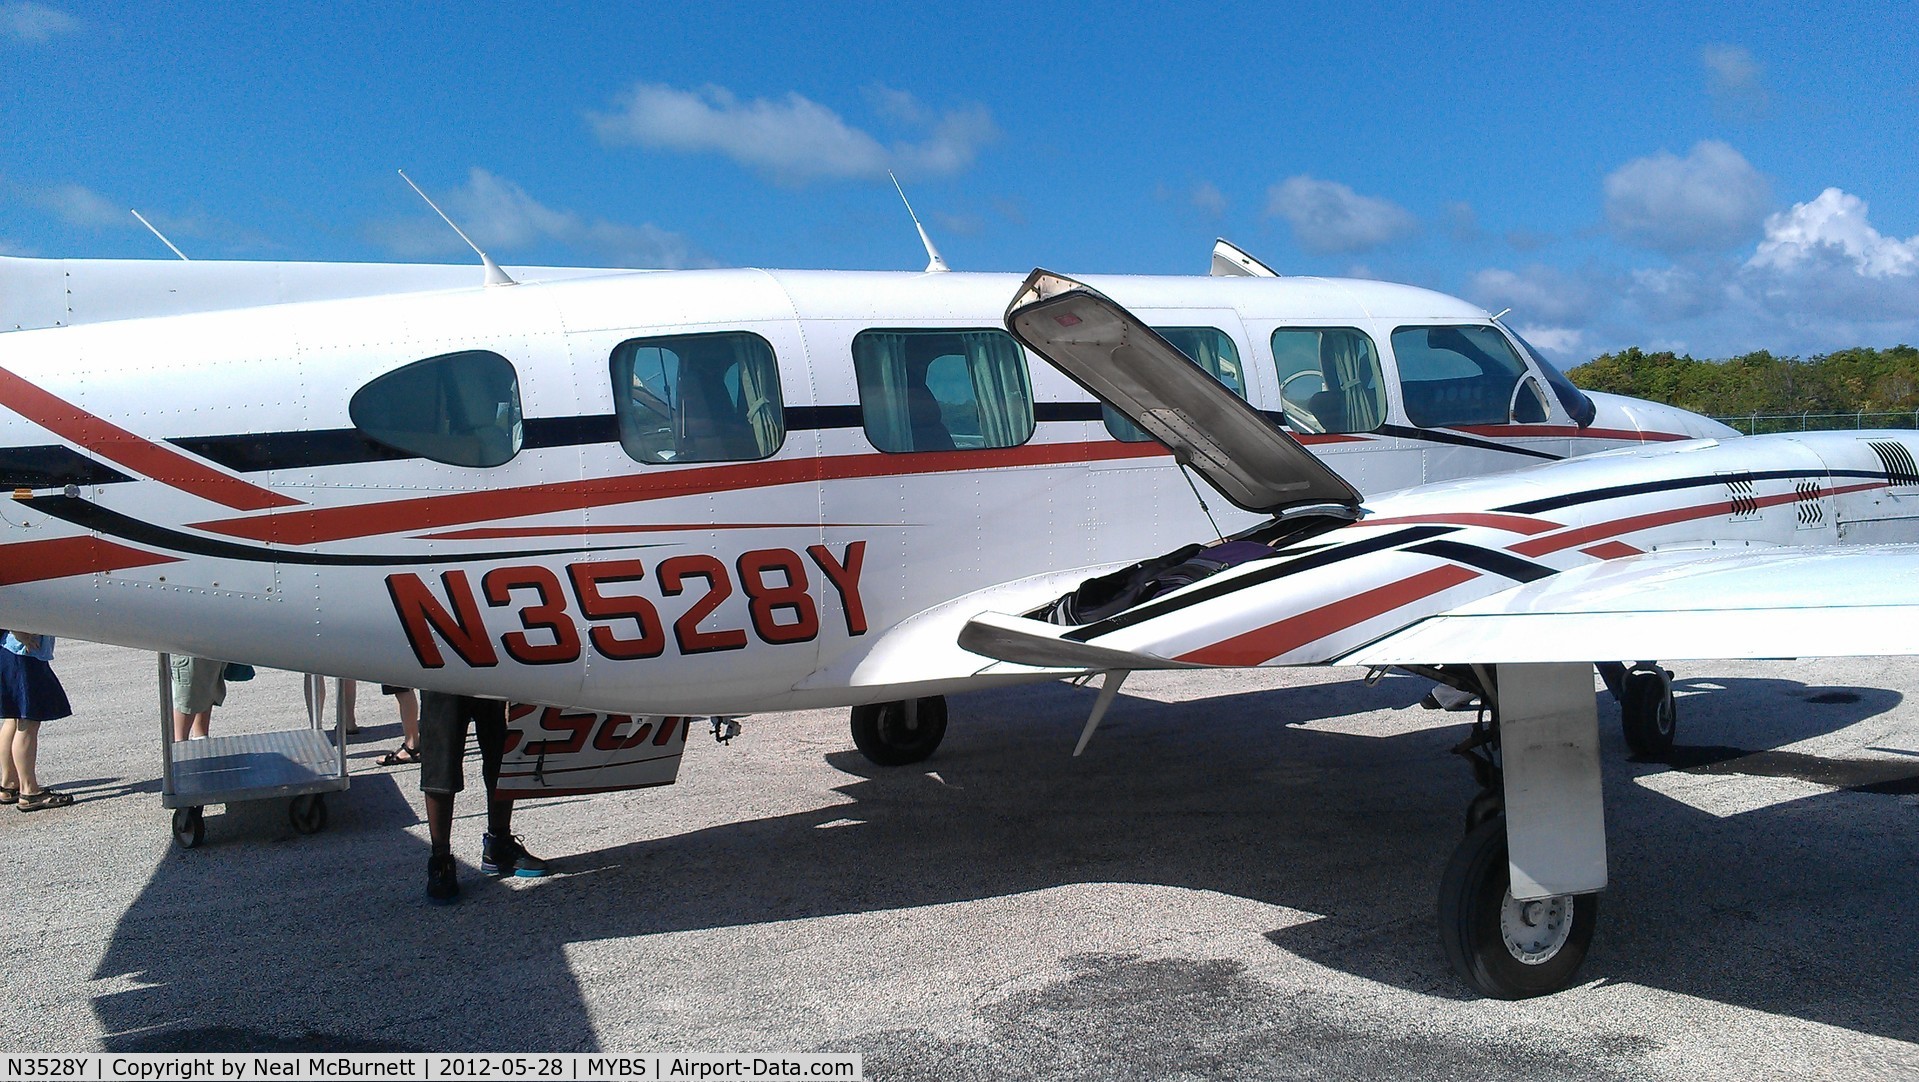 N3528Y, 1979 Piper PA-31-350 Chieftain C/N 31-7952149, Just landed in Bimini, on a trip from Ft Lauderdale